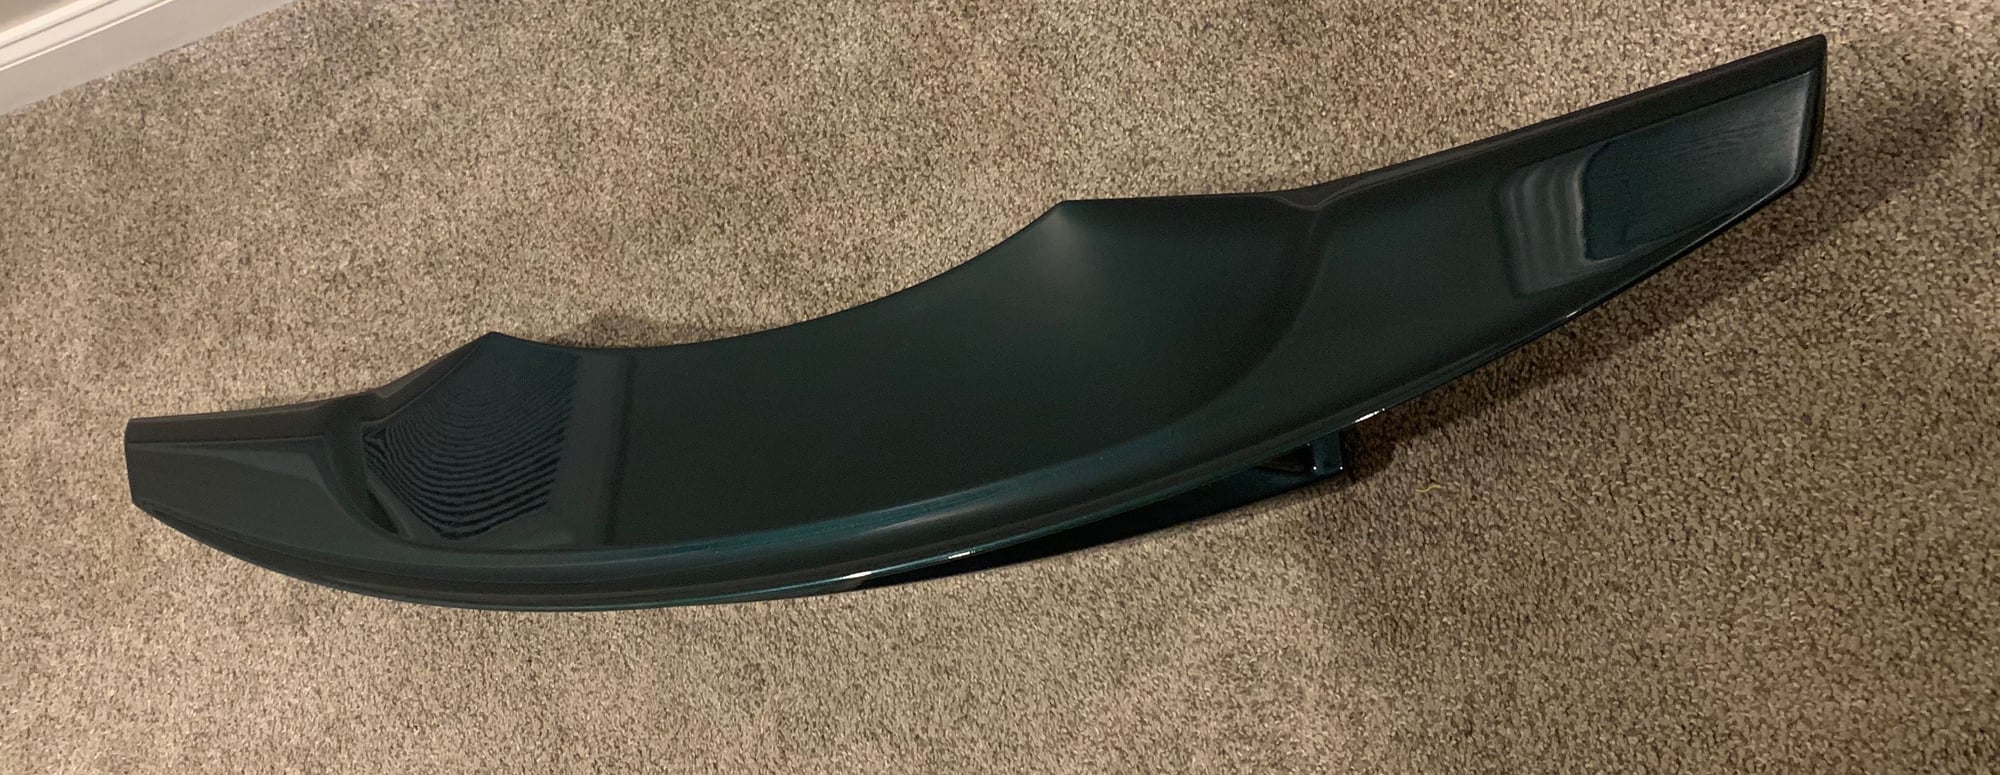 Exterior Body Parts - OEM fixed wing - British Racing Green - Used - 2015 to 2020 Jaguar F-Type - Butler, PA 16001, United States